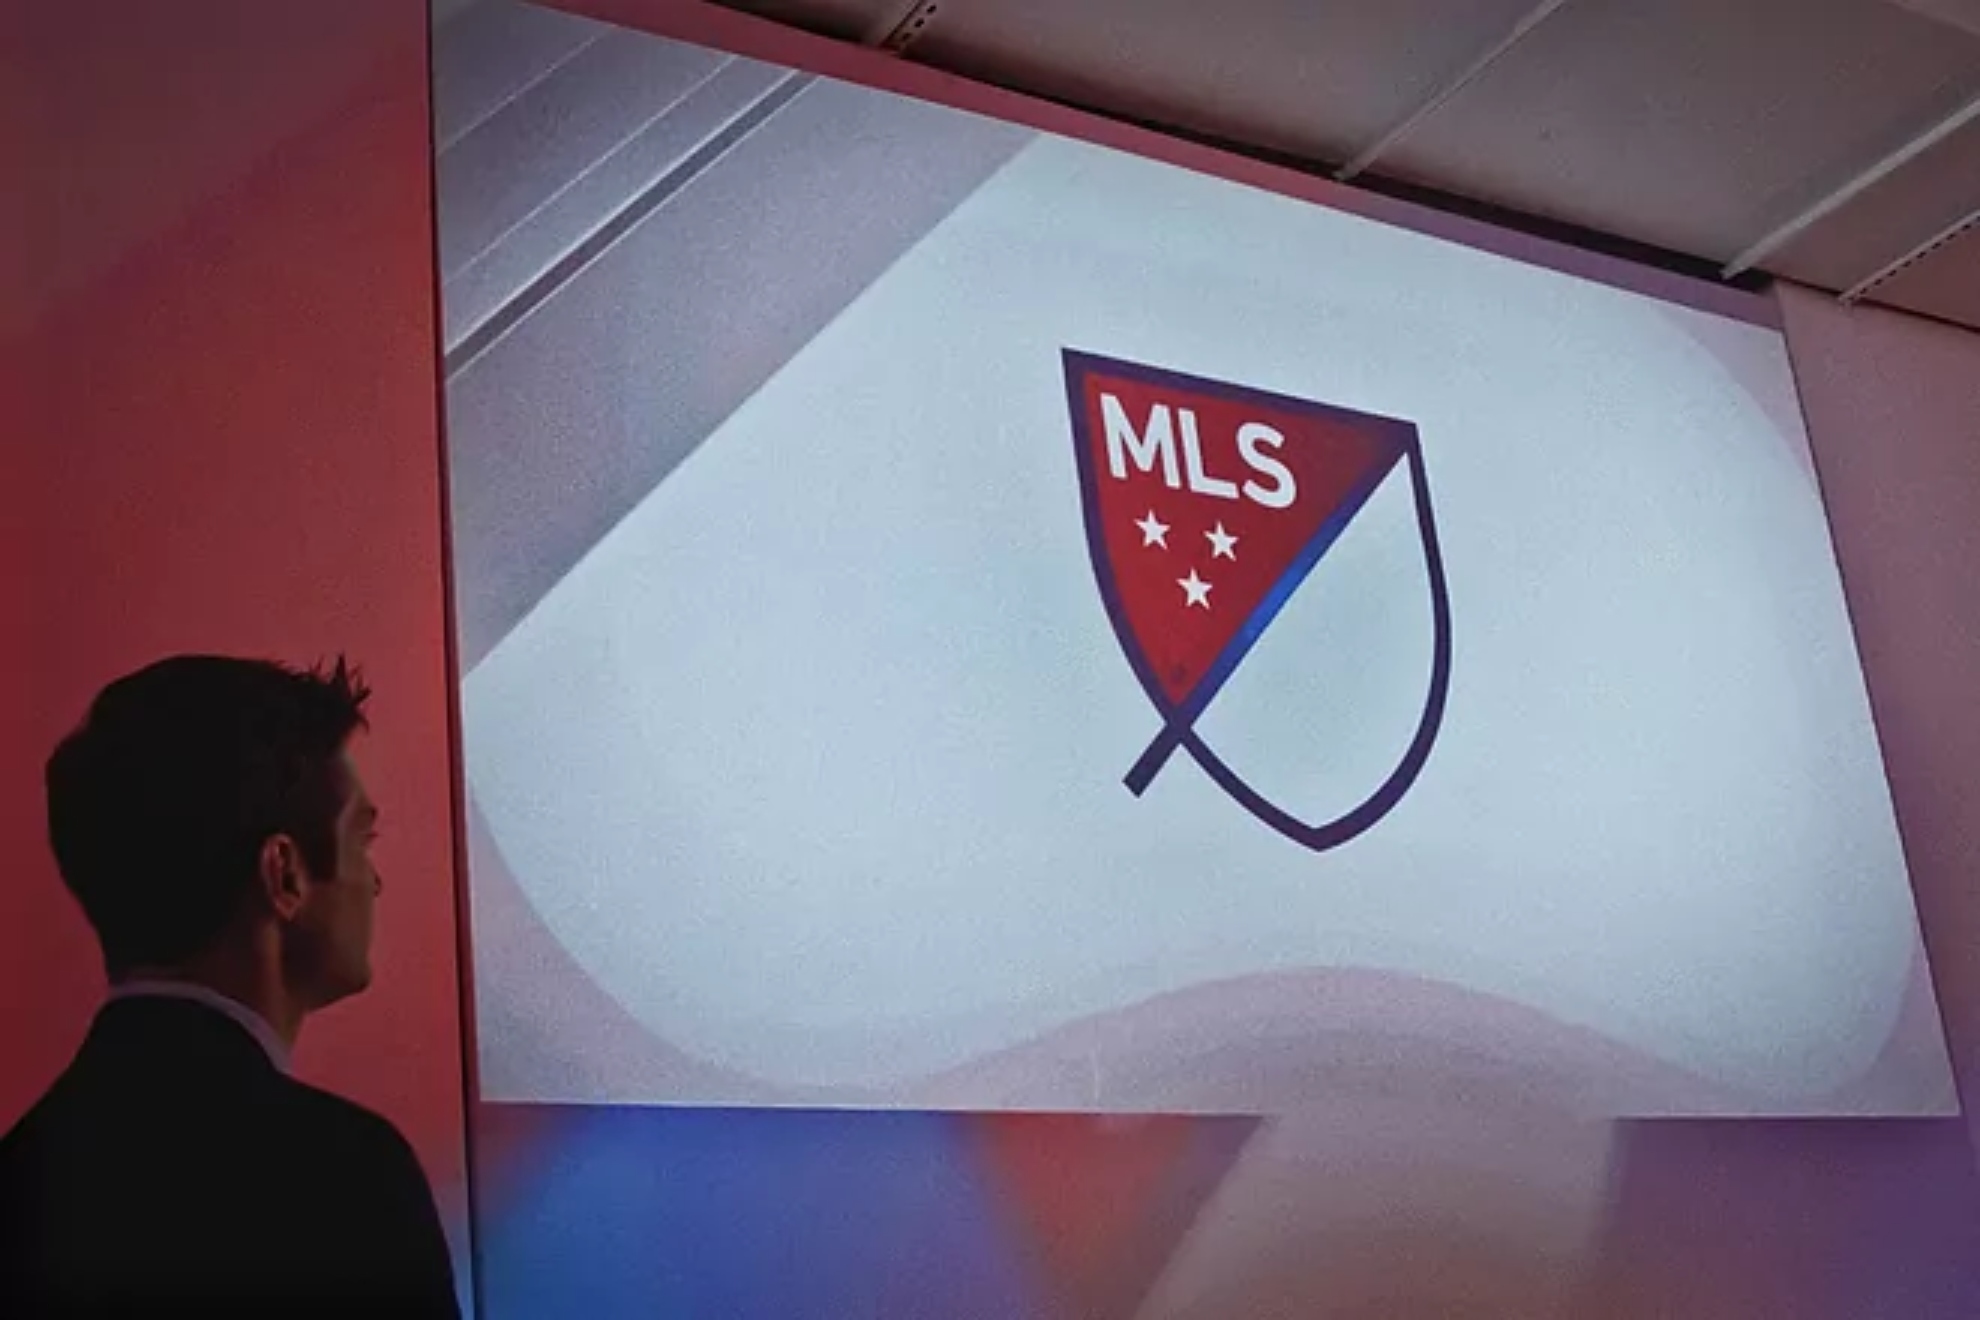 MLS celebrates a year of expansion with the arrival of world-class figures, hand in hand with Lionel Messi